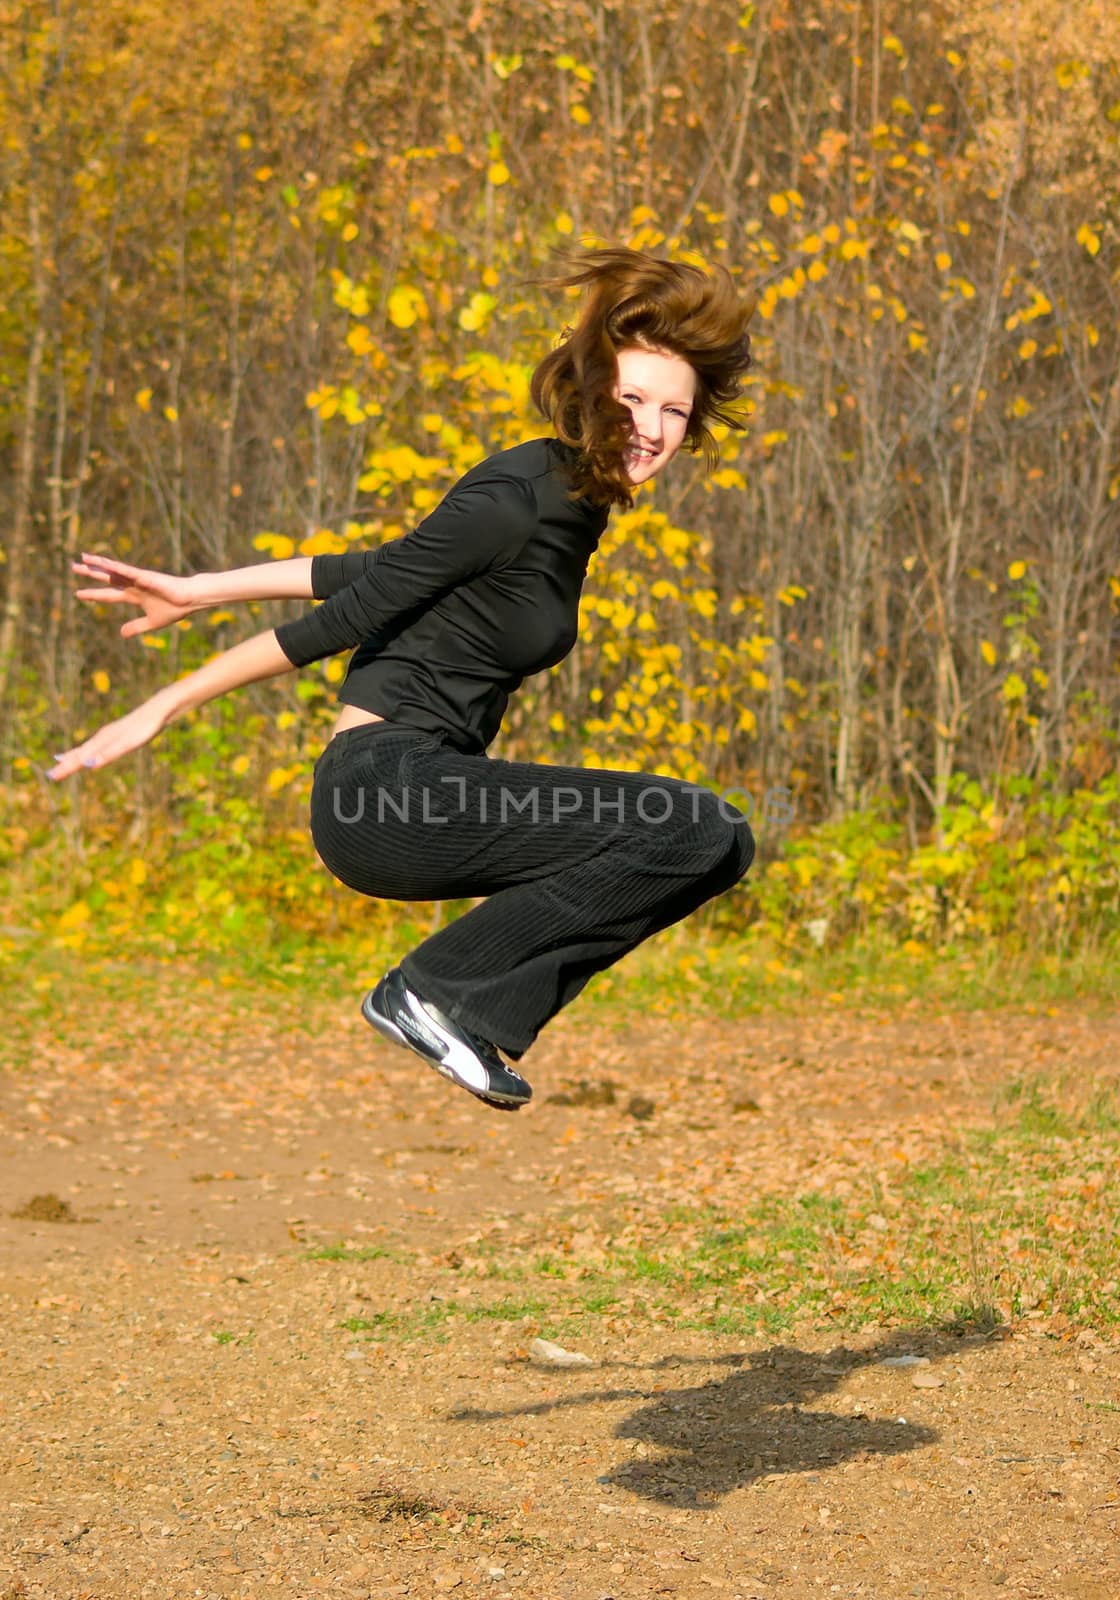 The jumping girl against the autumn nature